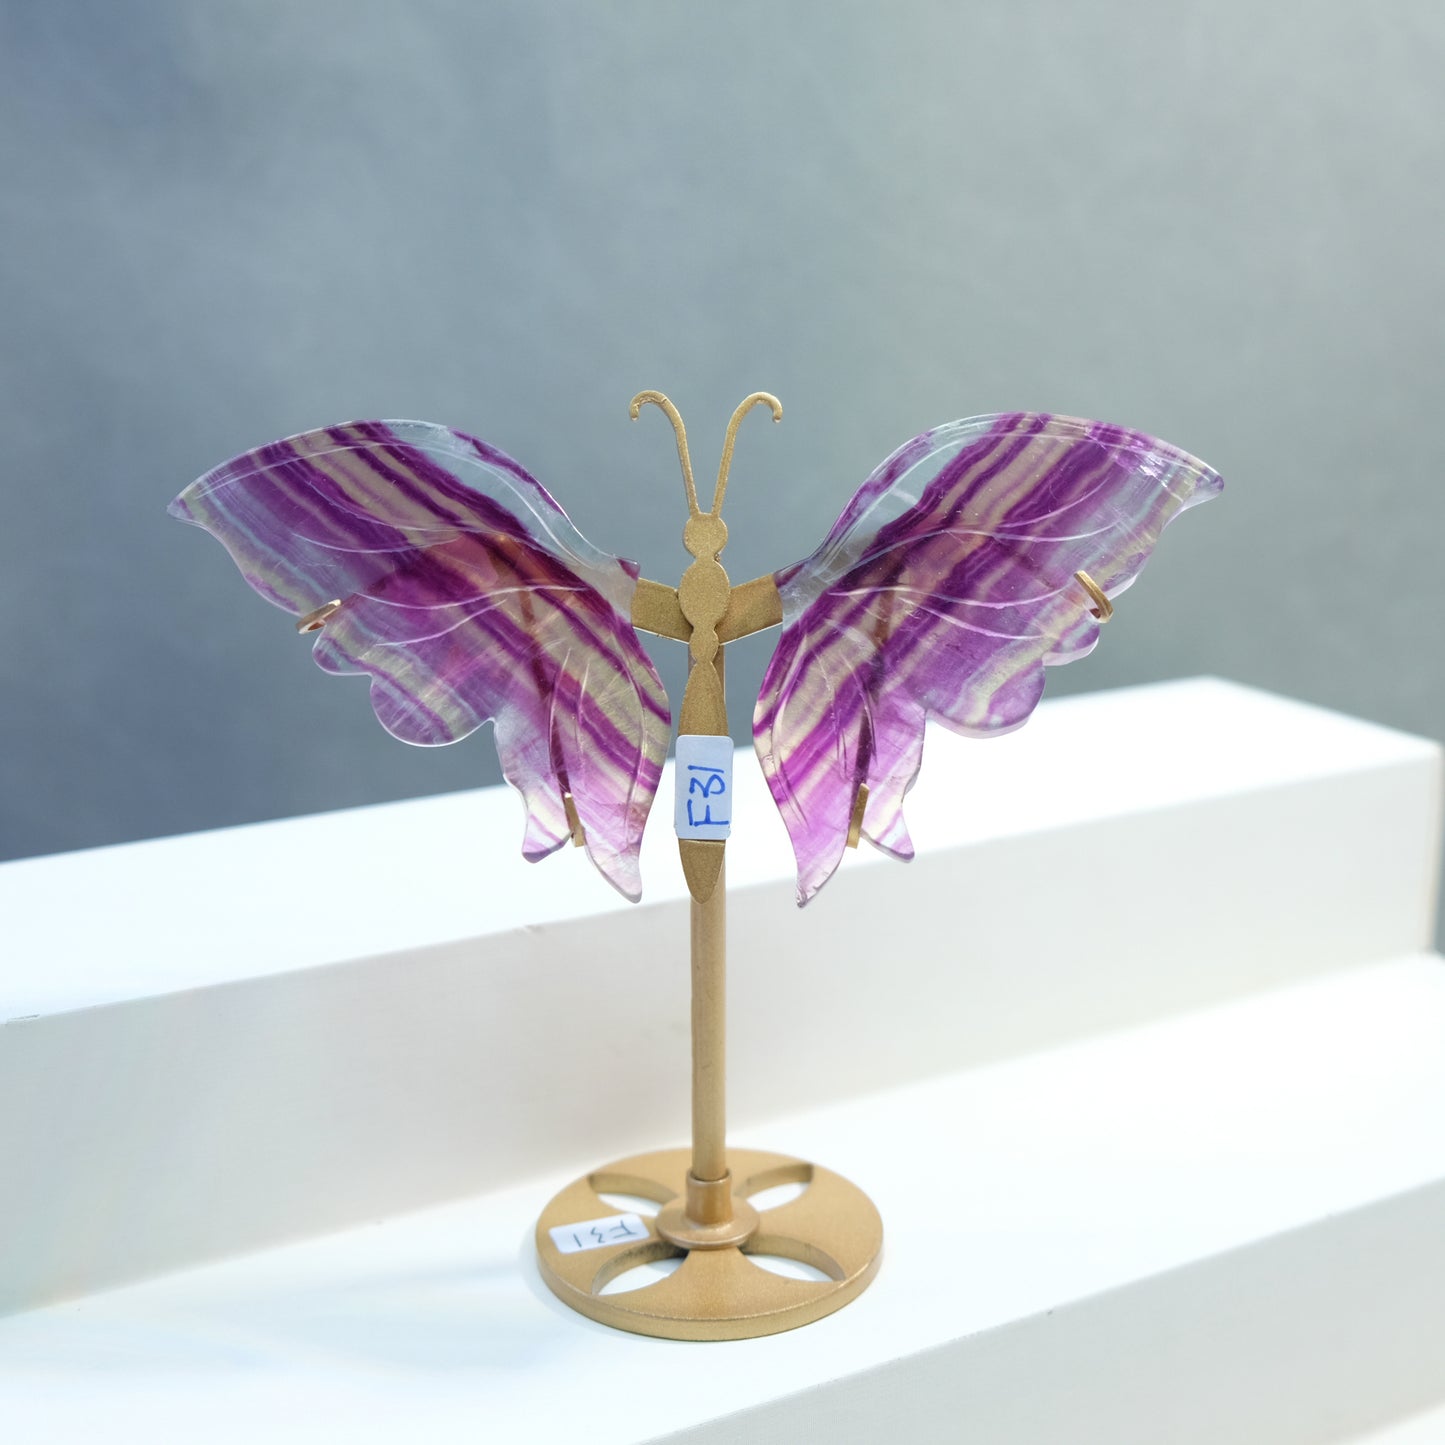 [Wholesale Price]Exquisite Candy Fluorite Pink Fluorite Crystal Butterfly Wings One of A Kind Pieces